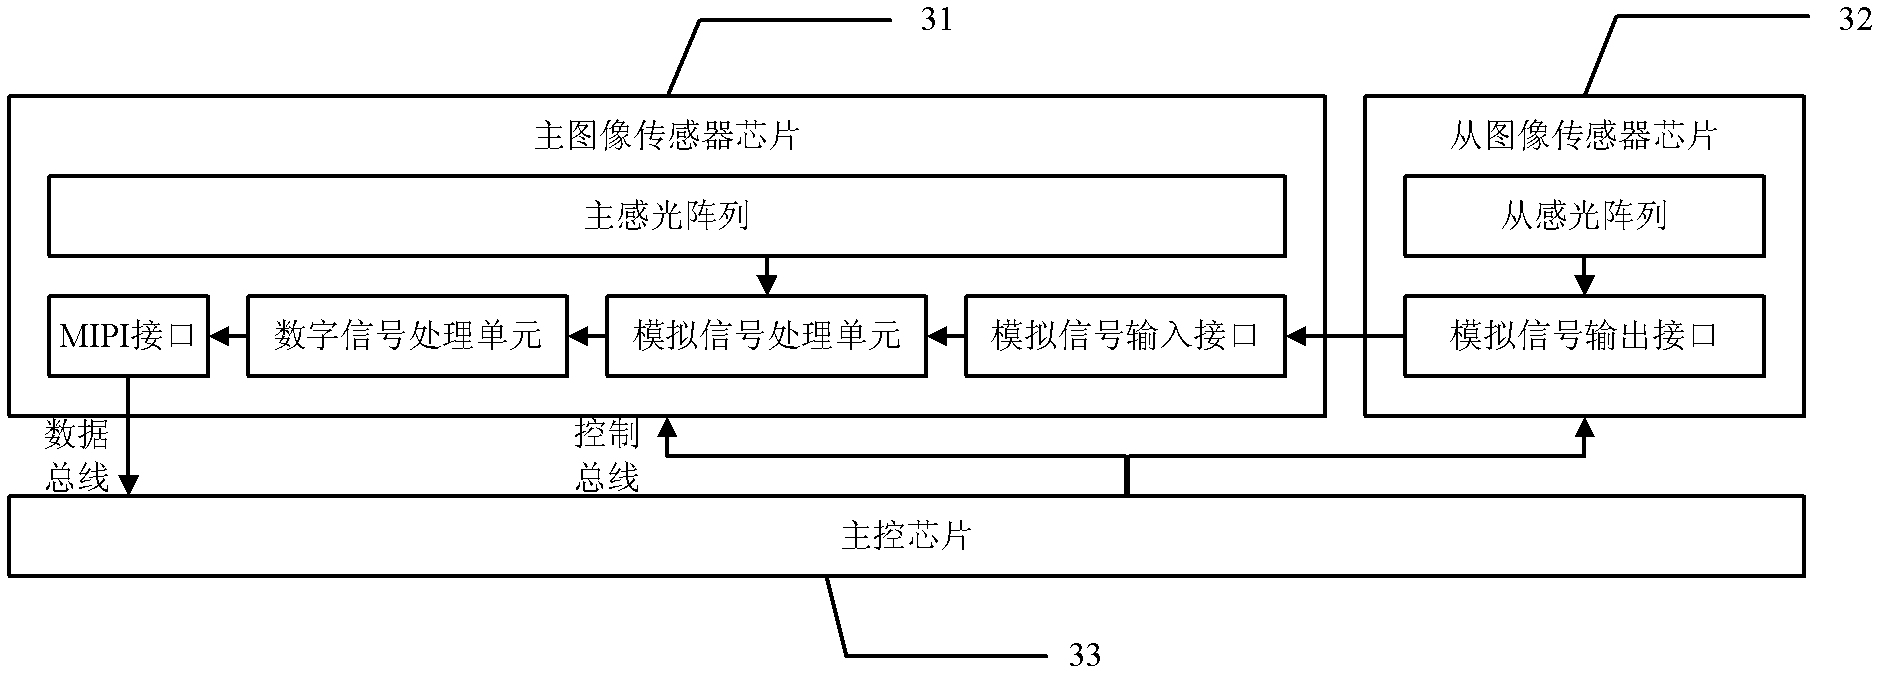 Multi-image sensor image processing device with MIPI (Mobile Industry Processor Interface) and method